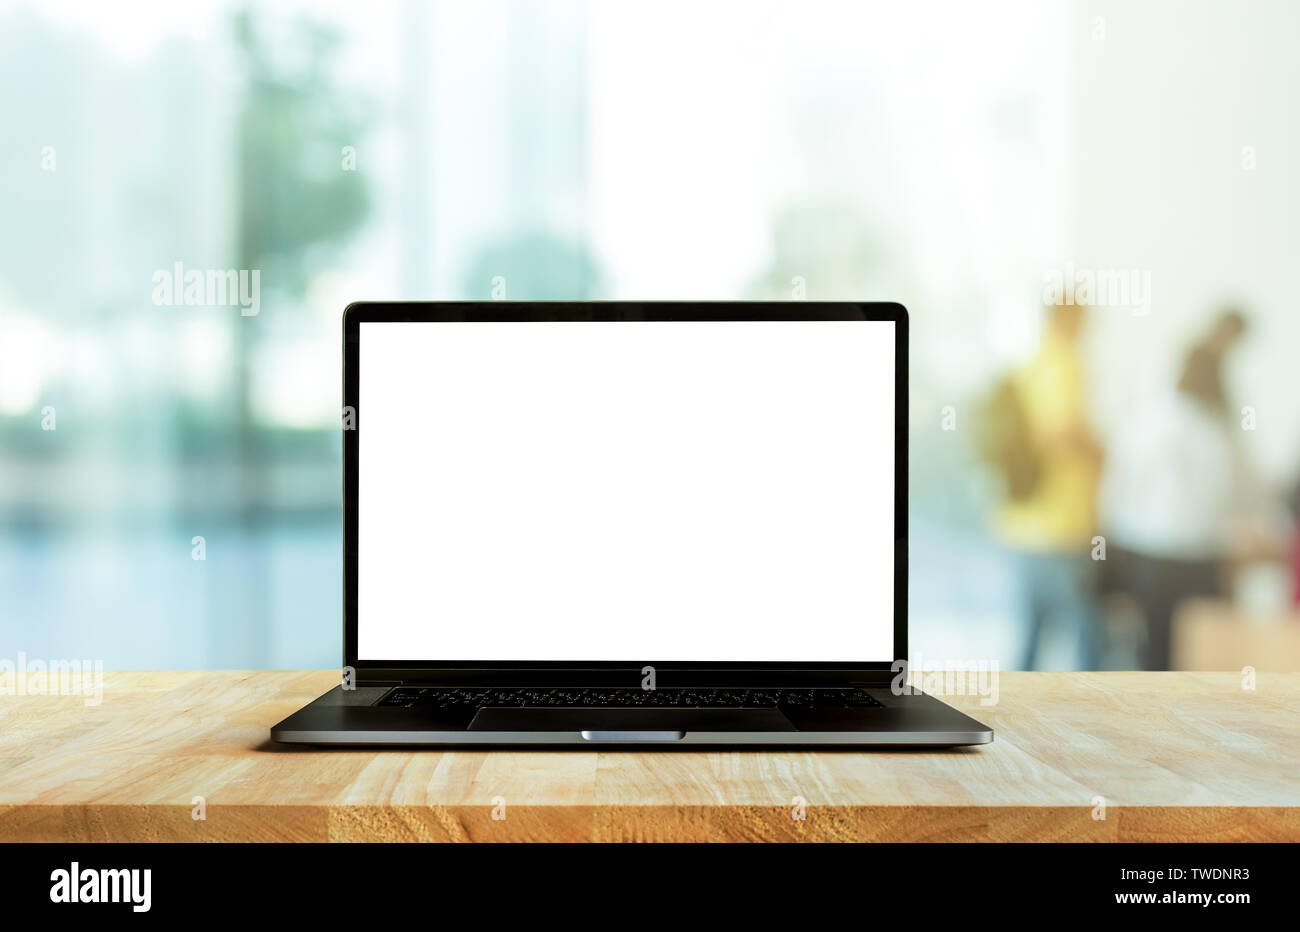 Modern Computer Laptop With Blank Screen On Counter Bar Retail Store Shop And Window View Backgrounds Stock Photo Alamy